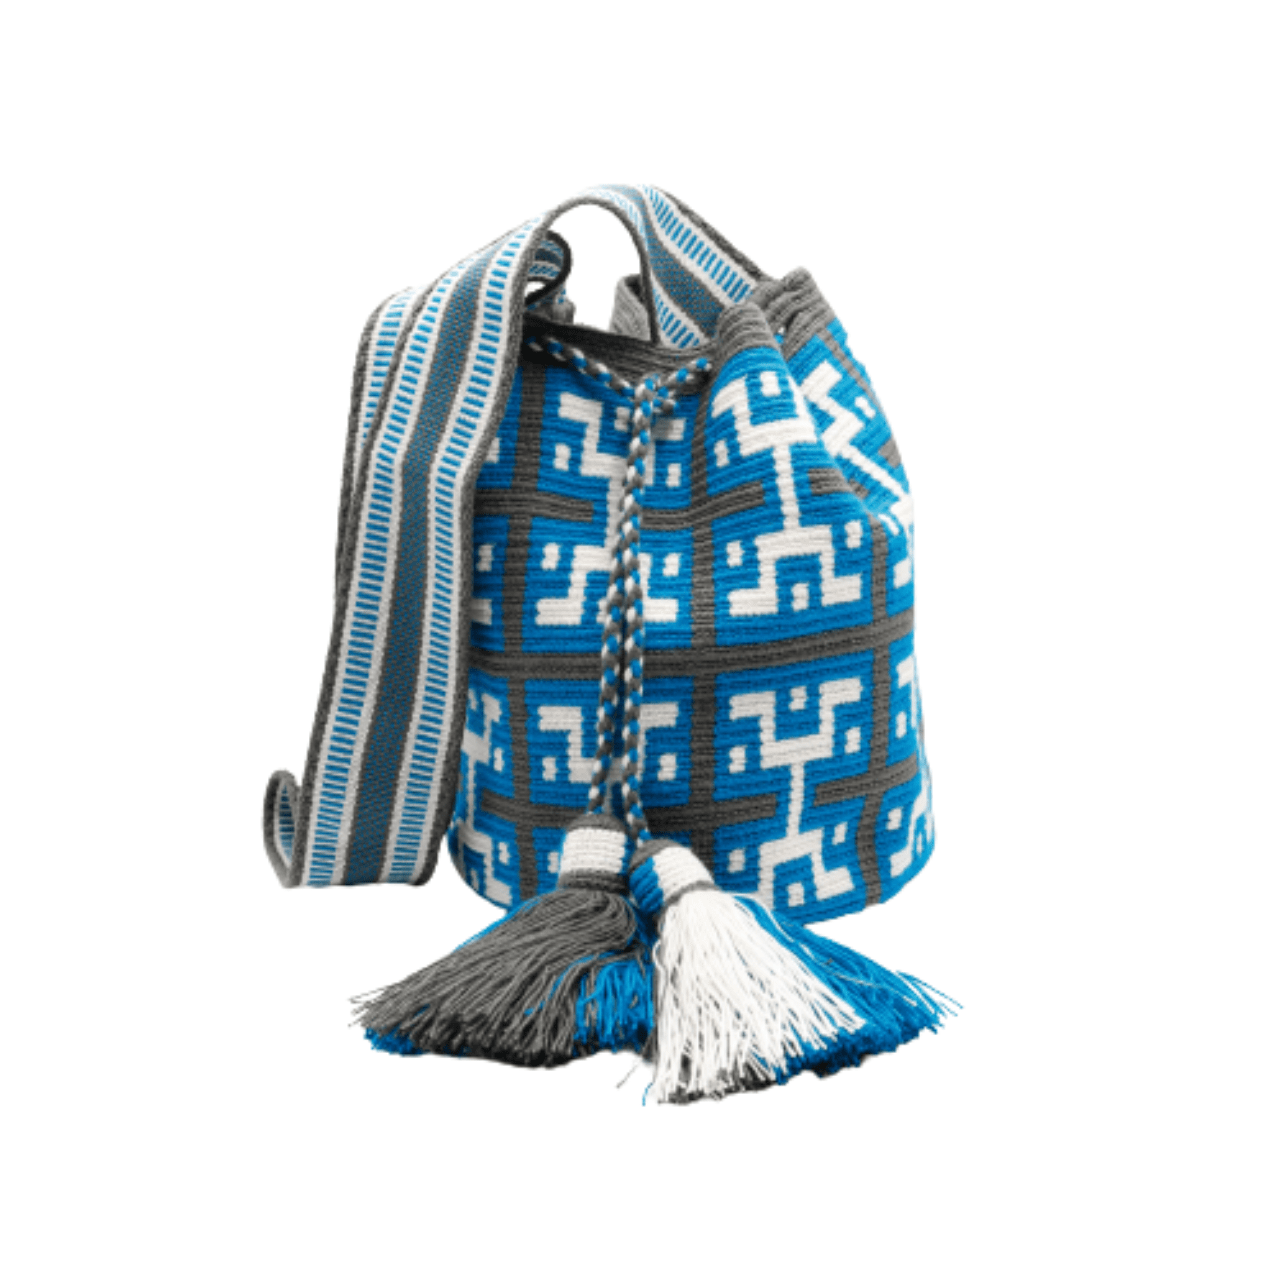 Tania Wayuu bag in rich teal and gray with white accents. The distinctive design sets this Wayuu bag apart as a unique addition to our collection.